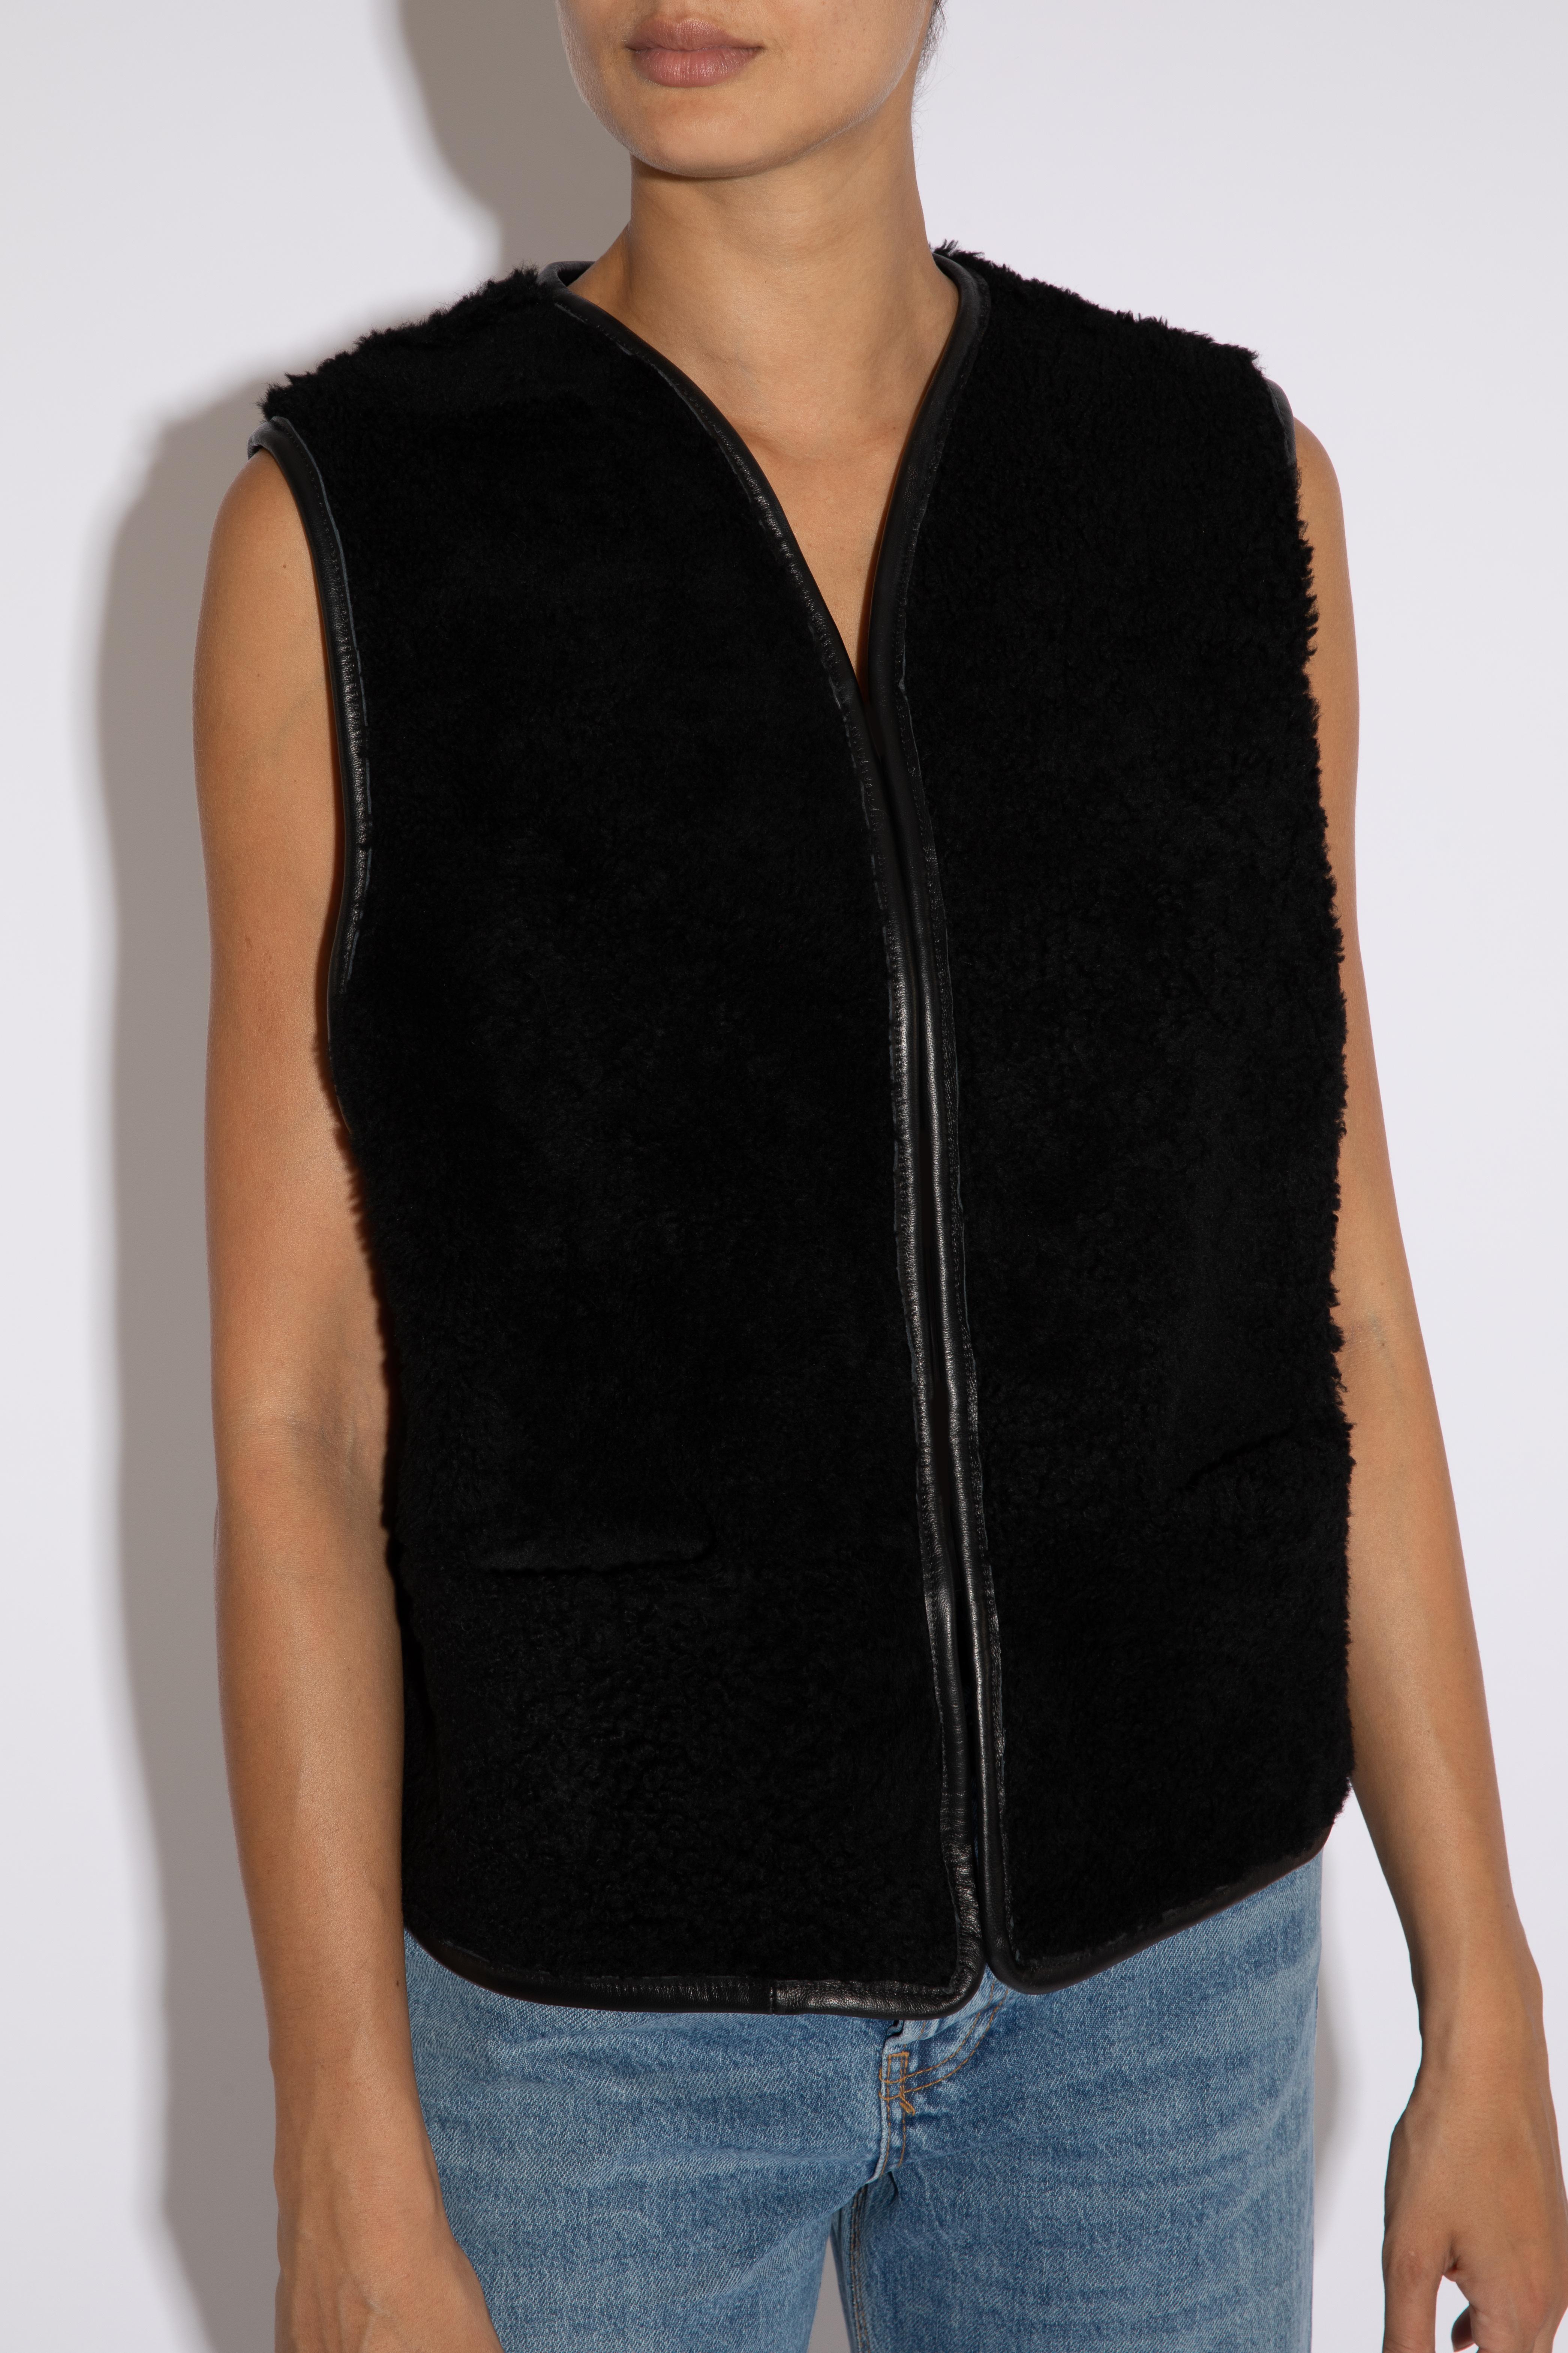 Verheyen London Reversible Shearling Gilet in Black - Size medium

Handmade in London, made with lamb merino shearling this luxury item is an investment piece to wear for a lifetime.  One side is leather and one side is merino shearling. Ideal for